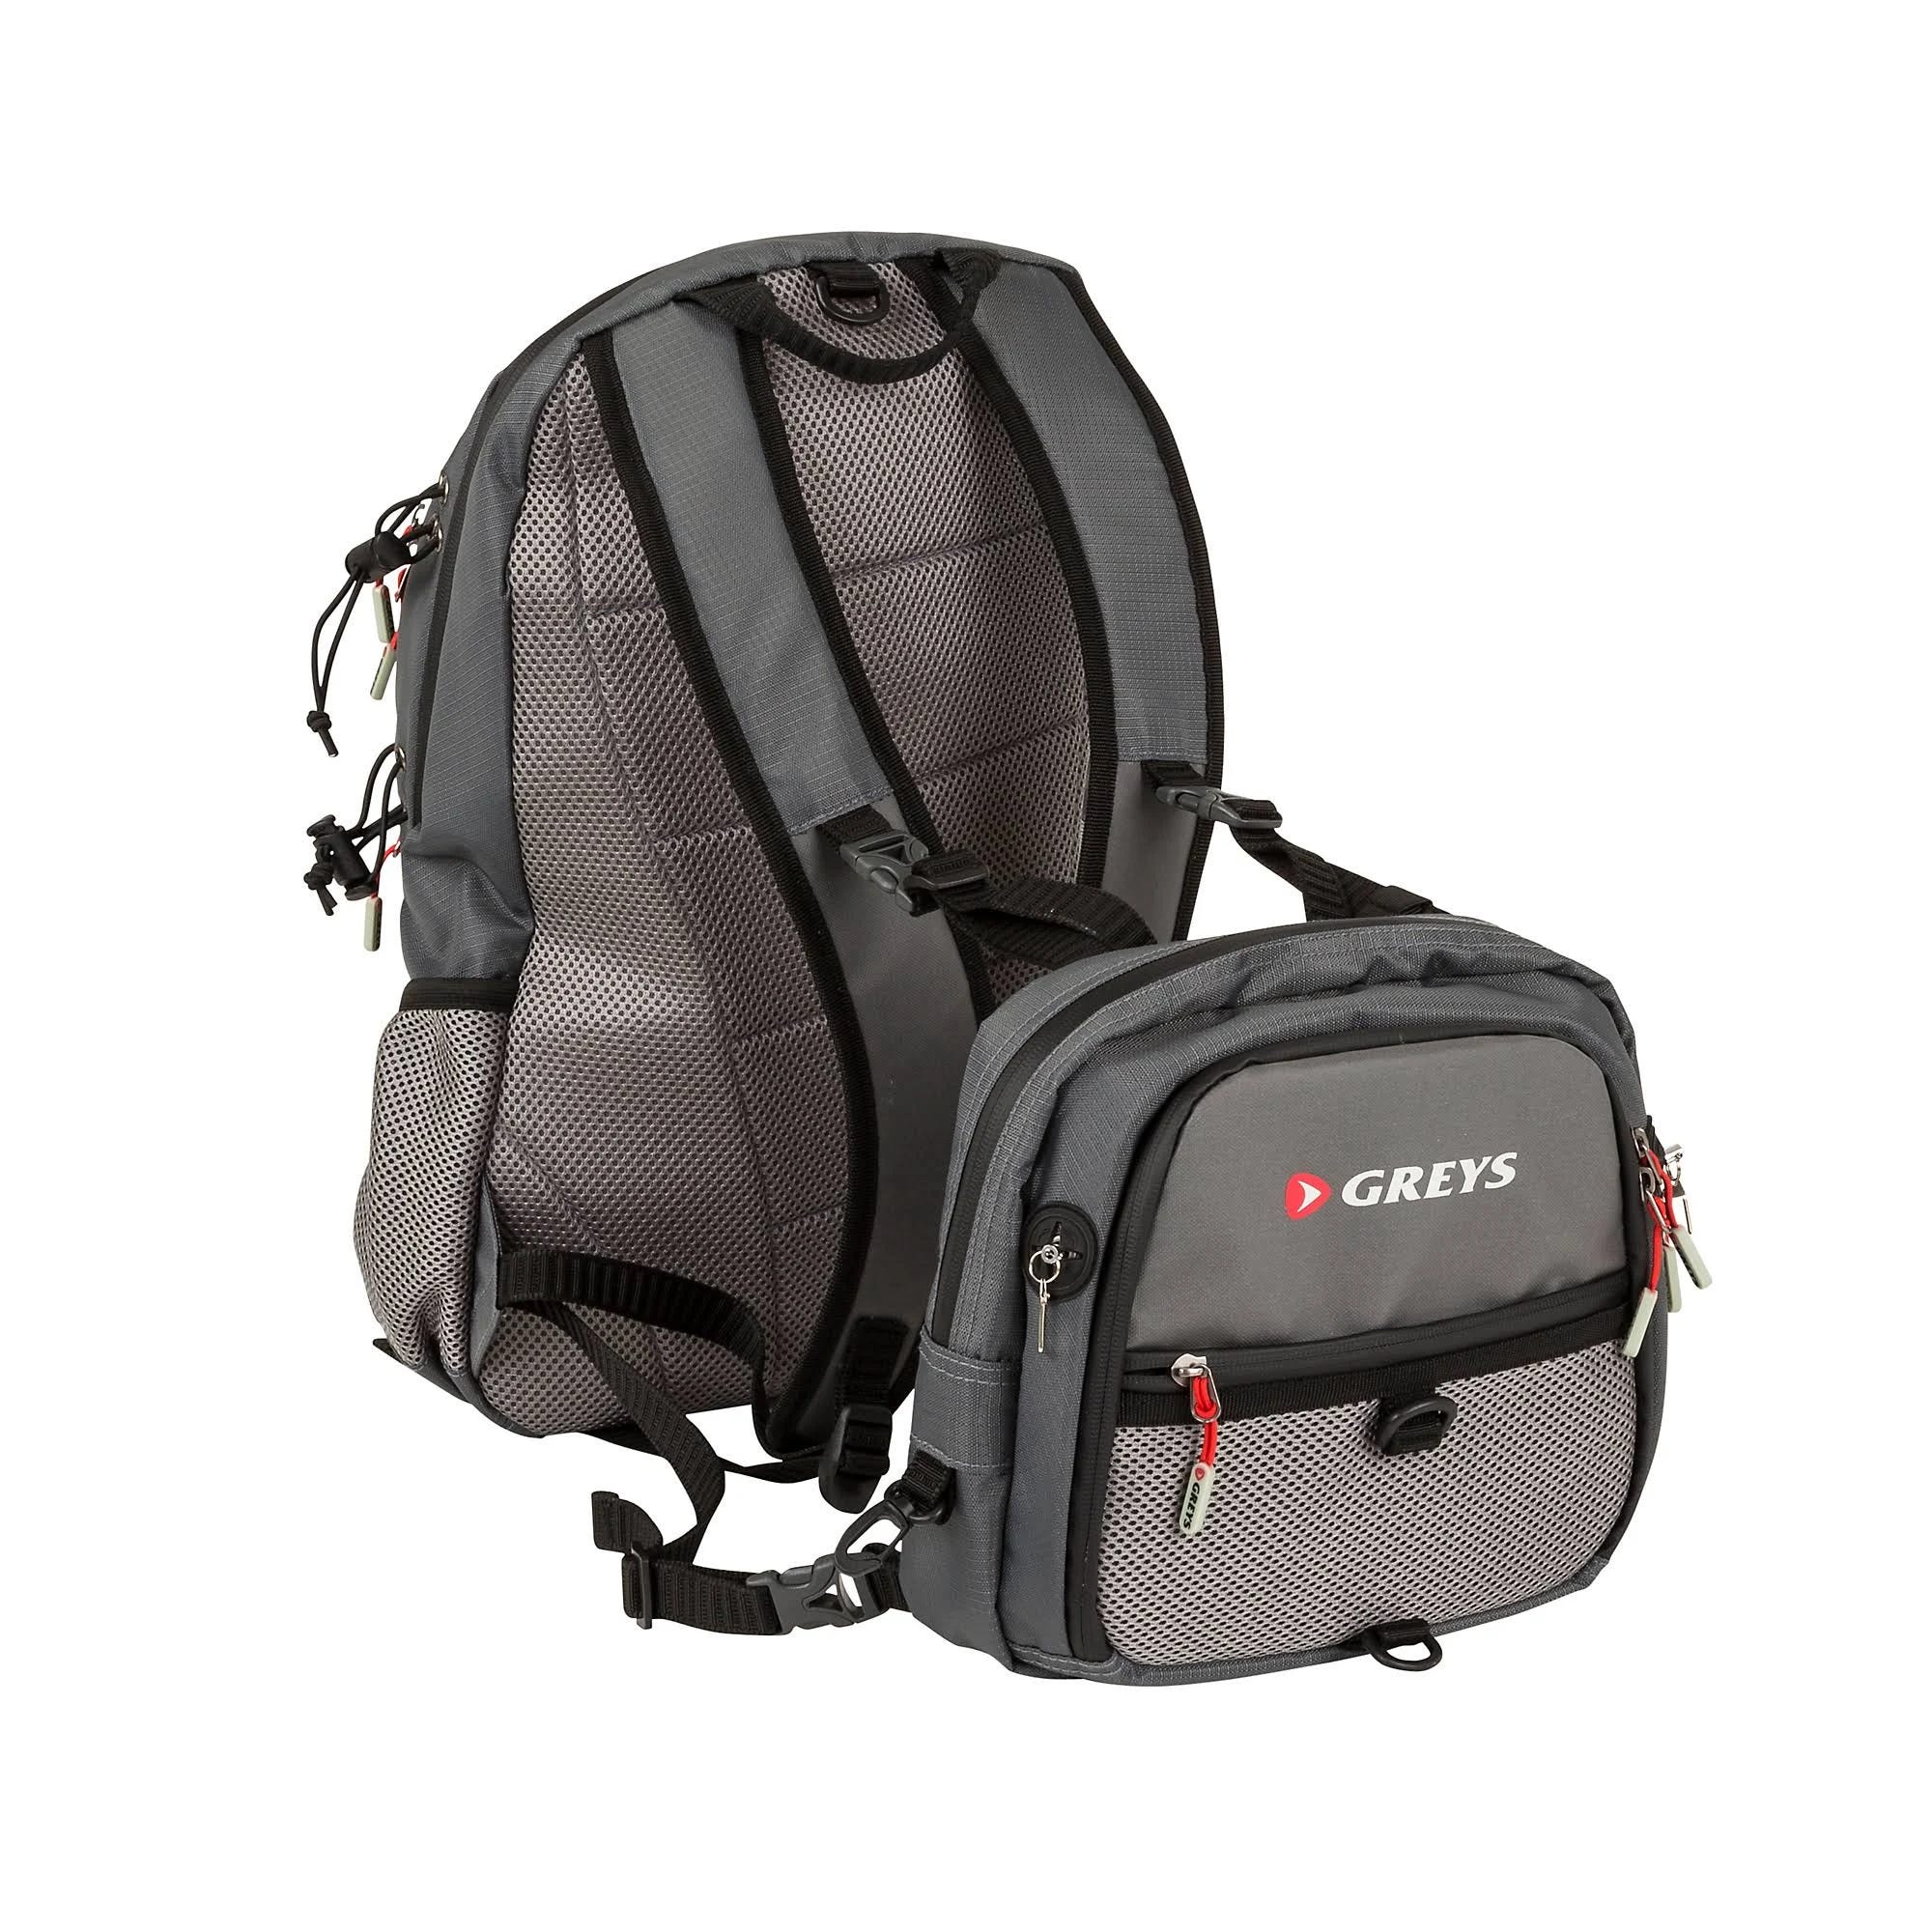 Versatile Fishing Backpack with Multiple Storage Solutions | Image